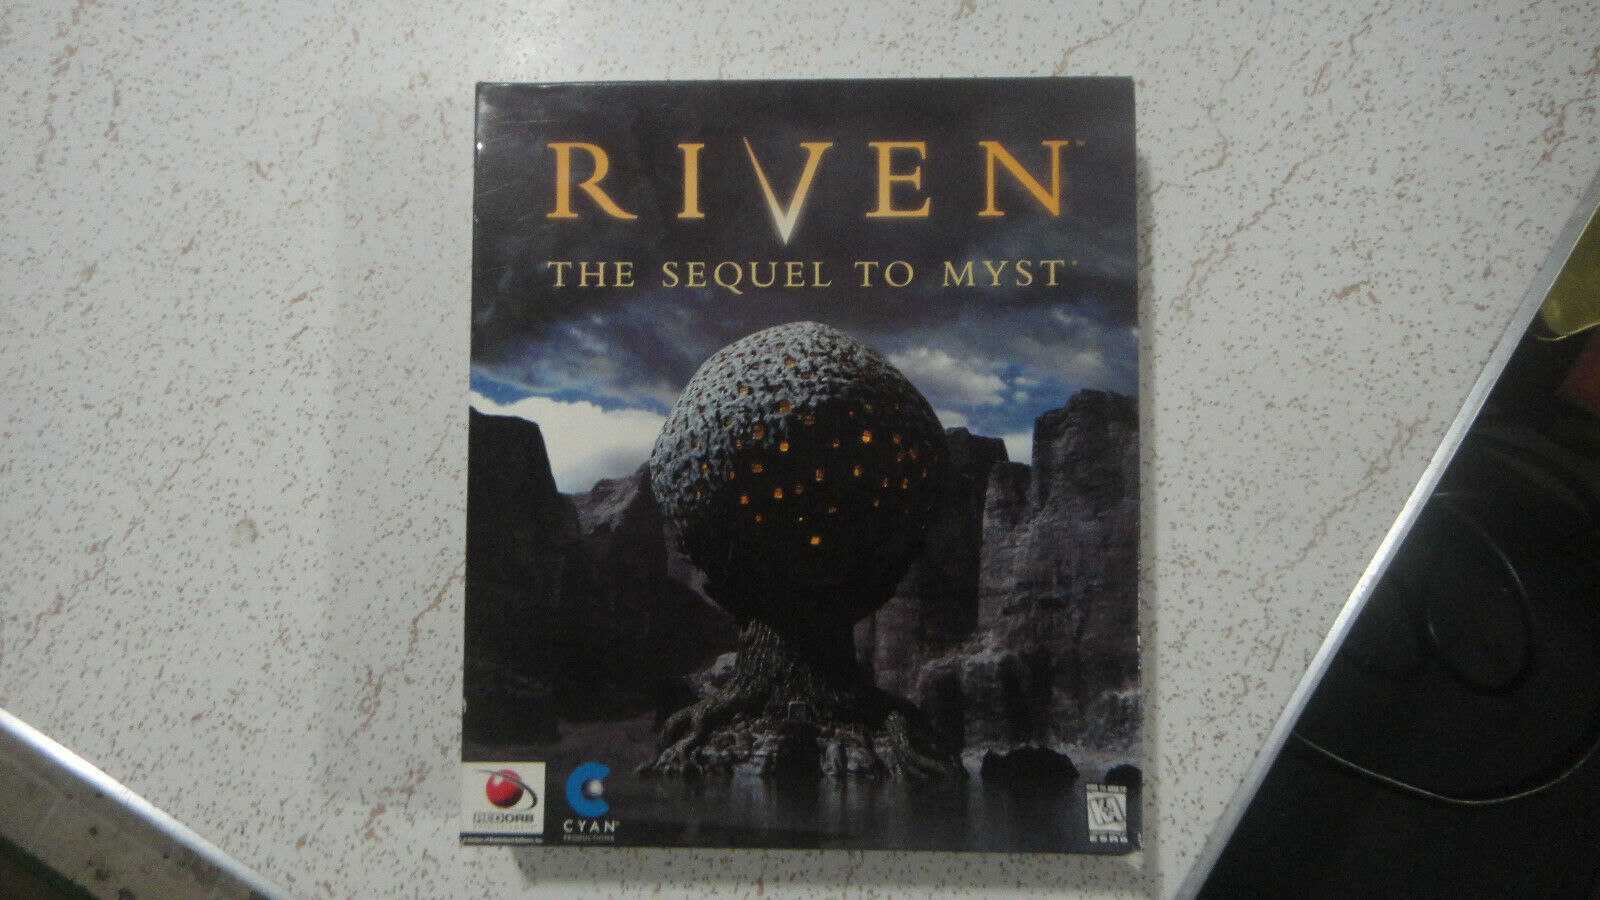 Primary image for Riven The Sequel to Myst **RARE** PC Big Box Game 5 CD set 1997. LooK!